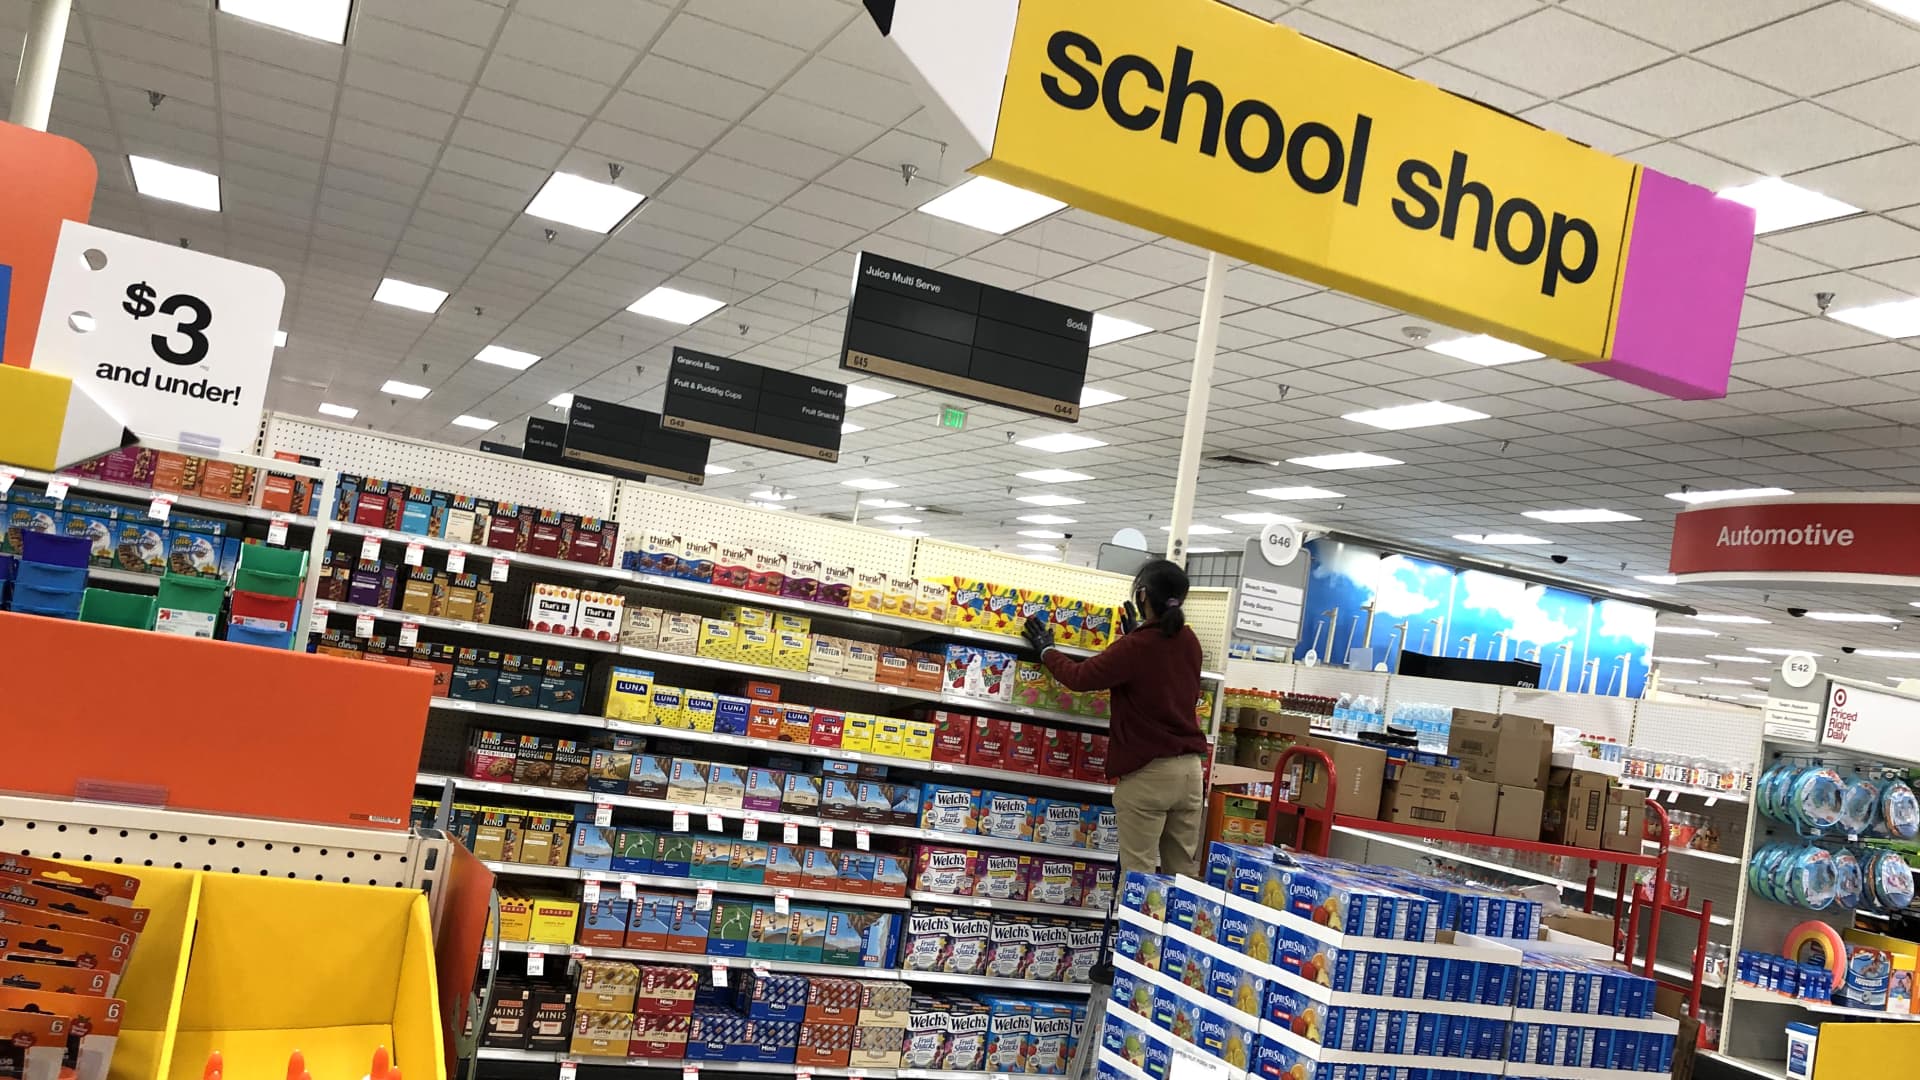 A worker stocks shelves of back-to-school supplies at a Target store on August 03, 2020 in Colma, California.